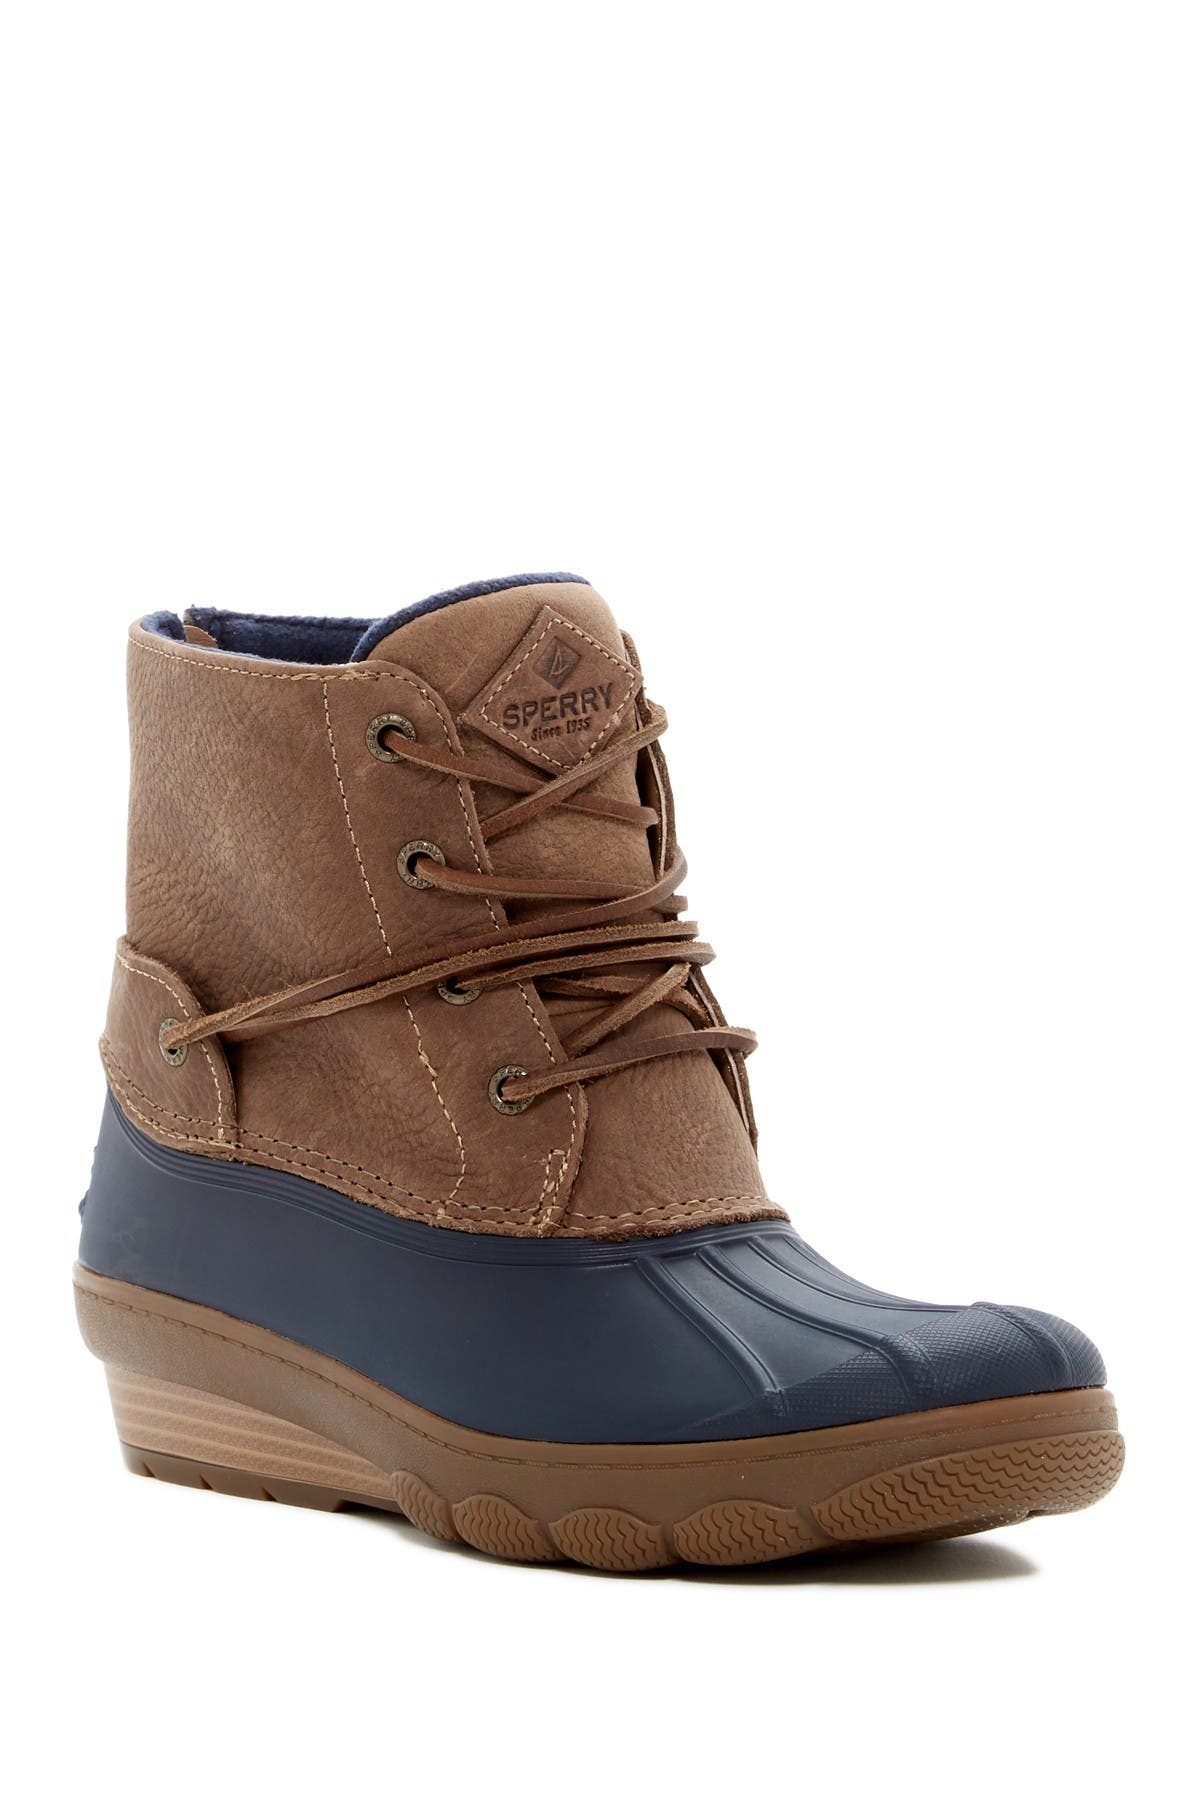 sperry saltwater wedge boots